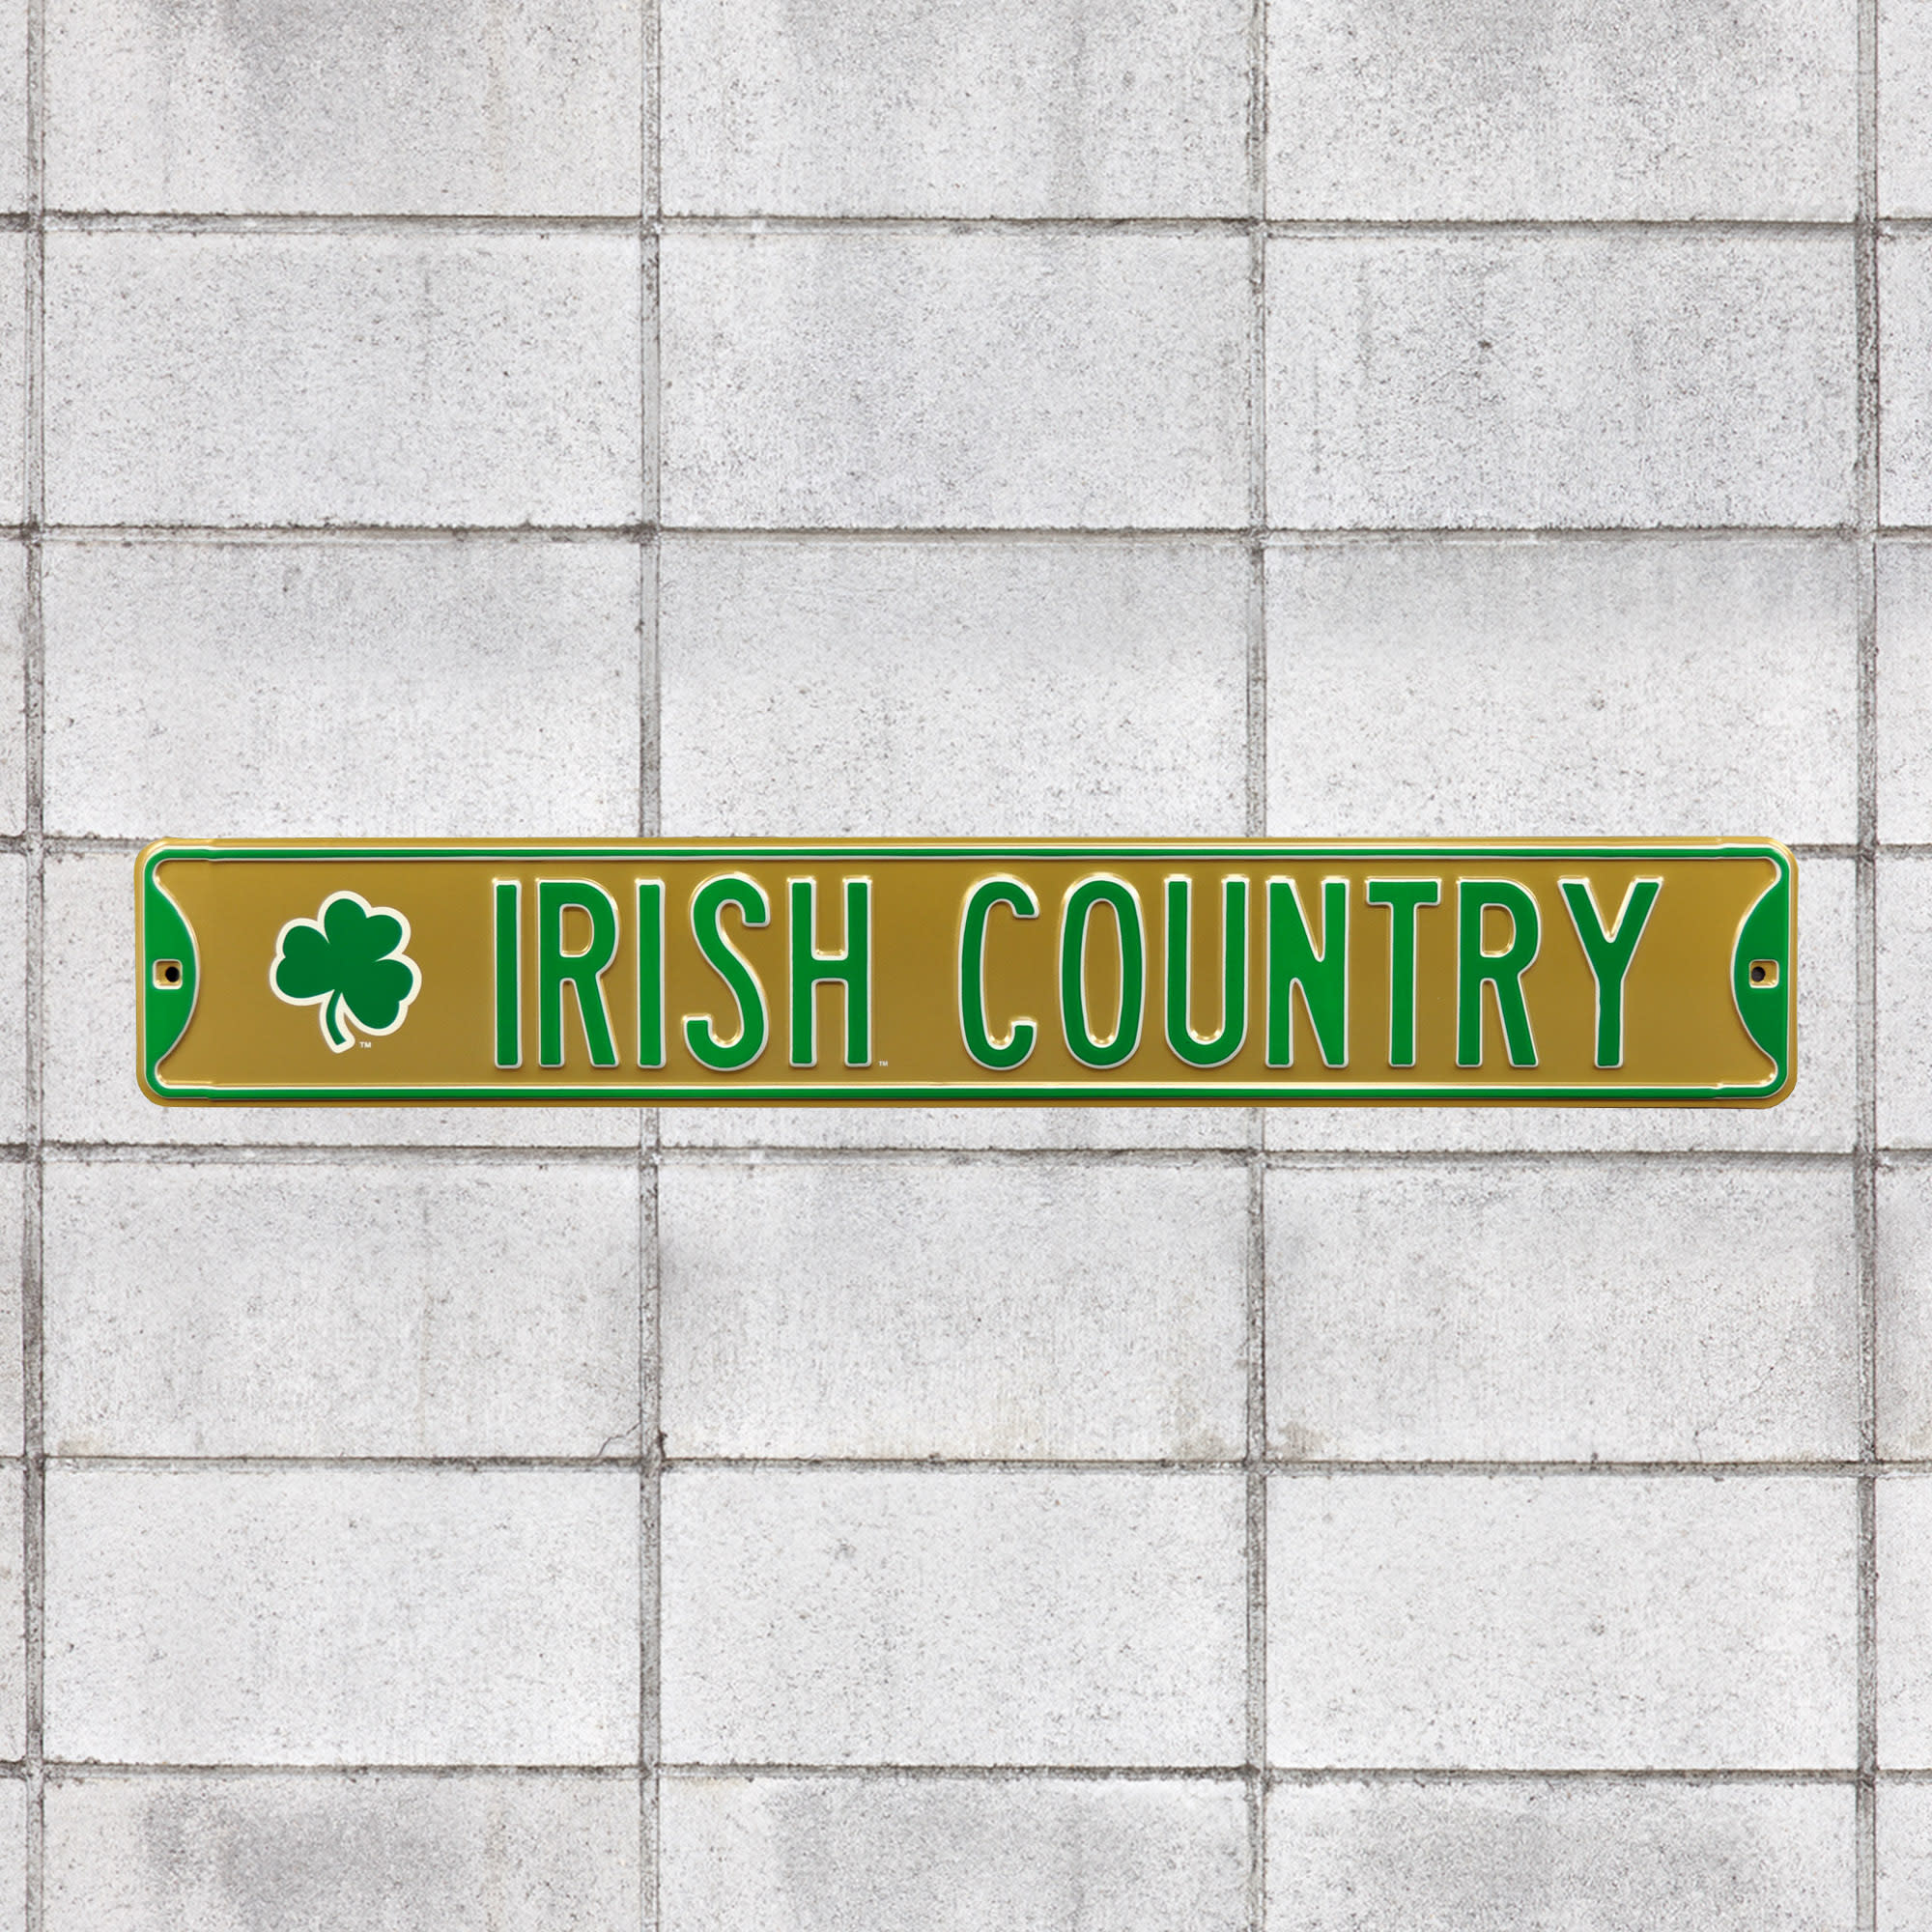 Notre Dame Fighting Irish: Irish Country - Officially Licensed Metal Street Sign 36.0"W x 6.0"H by Fathead | 100% Steel